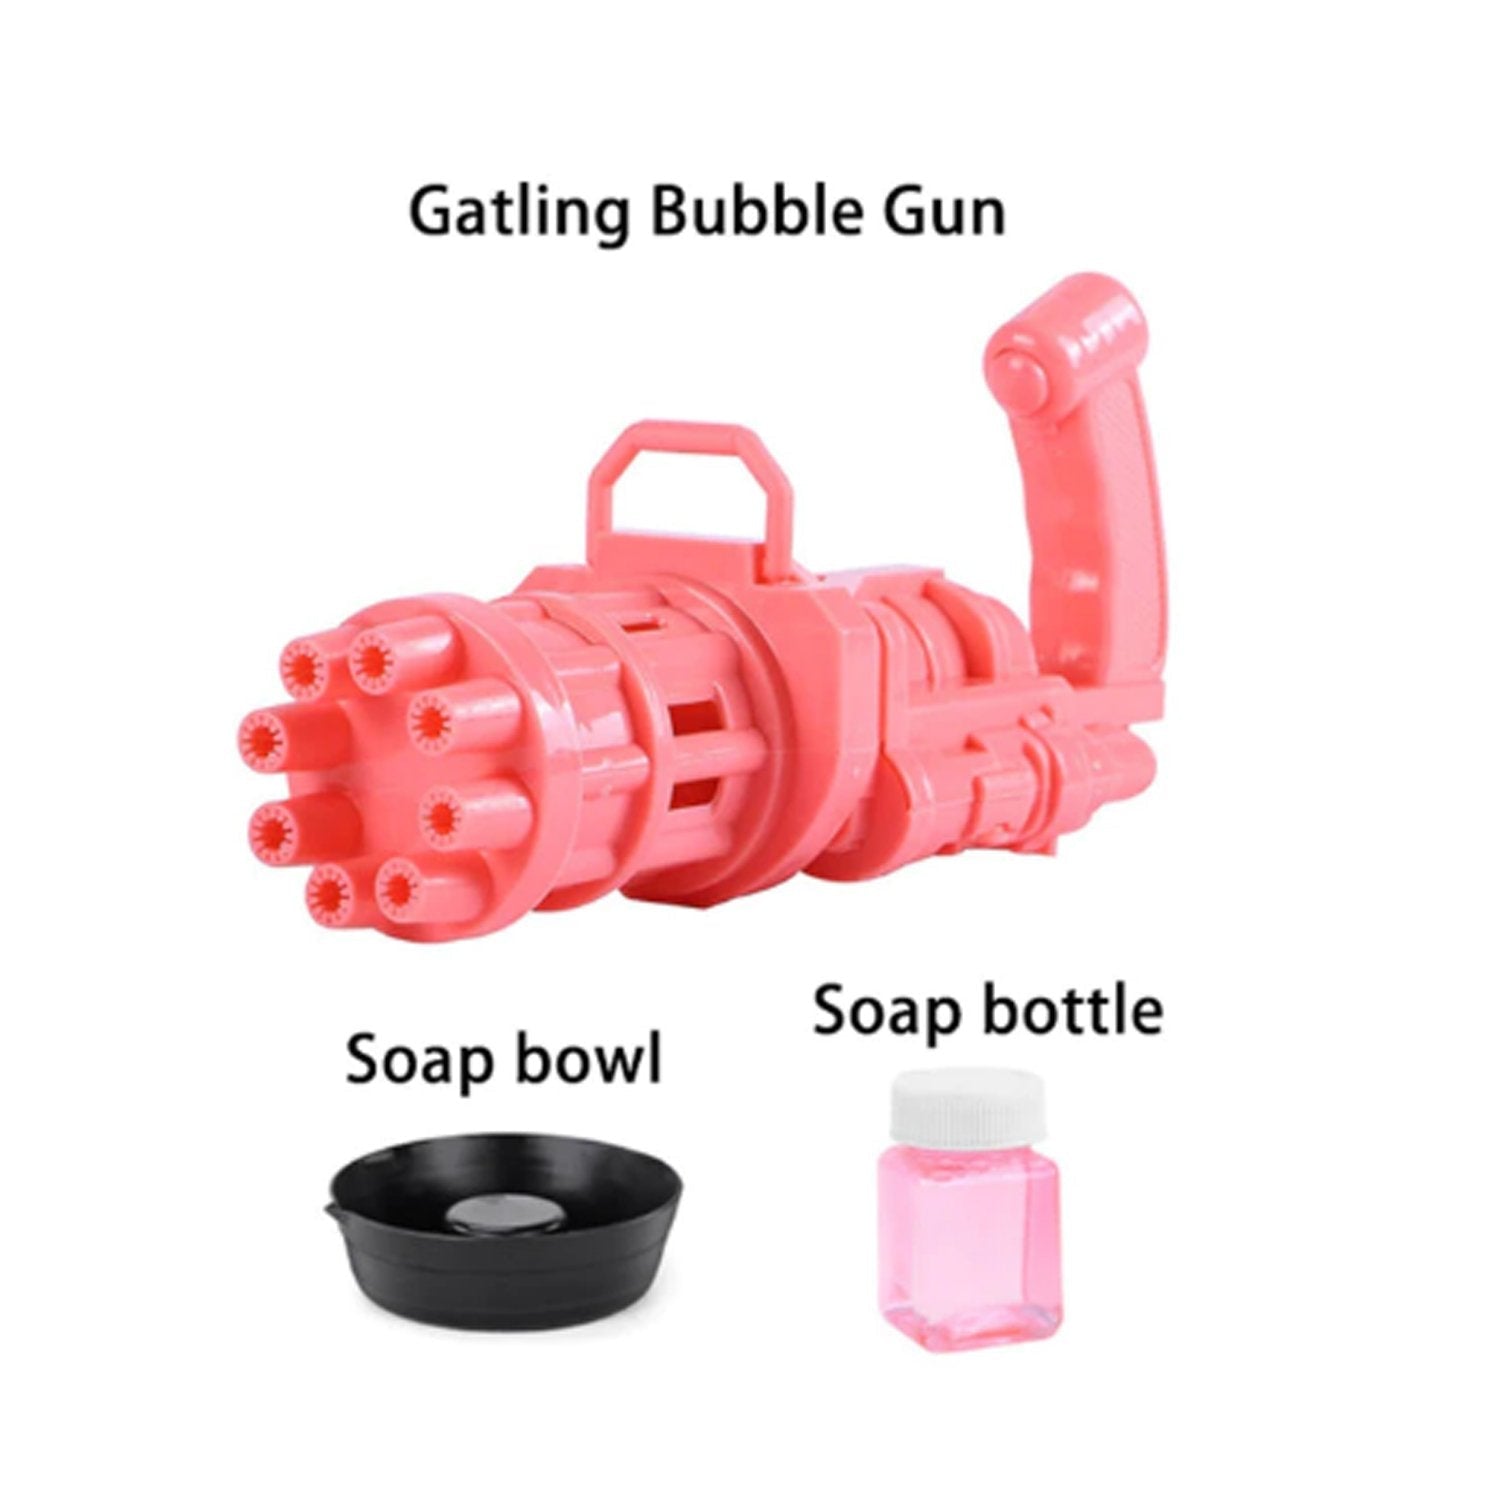 8028A Gatling Bubble Gun and launcher Used for making and producing bubbles, especially for kids.